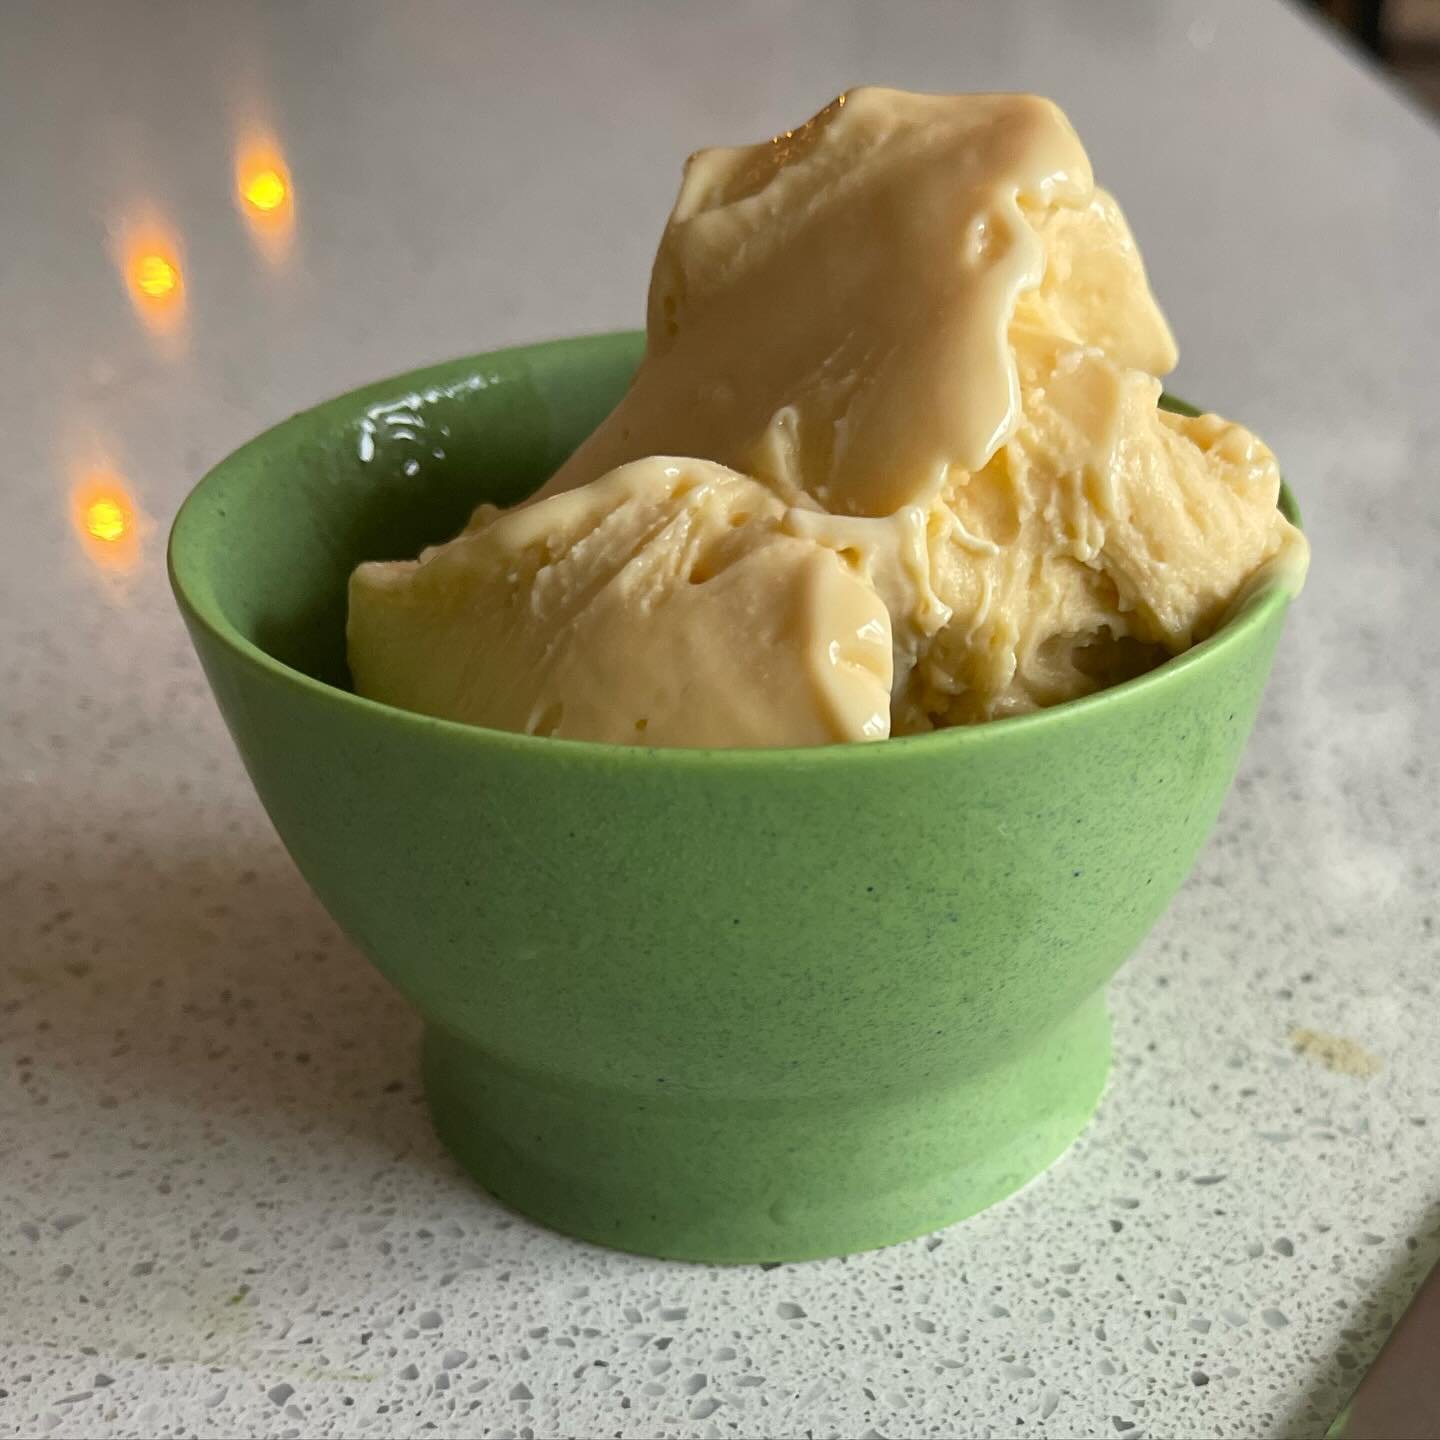 Old fashion vanilla ice cream with egg yolks - only for those who love high protein egg yolks with minimum sugar. The creaminess of the ice cream comes from the love of spinning, not the sugar. The beautiful yellow comes from the pure egg yolks. Deli